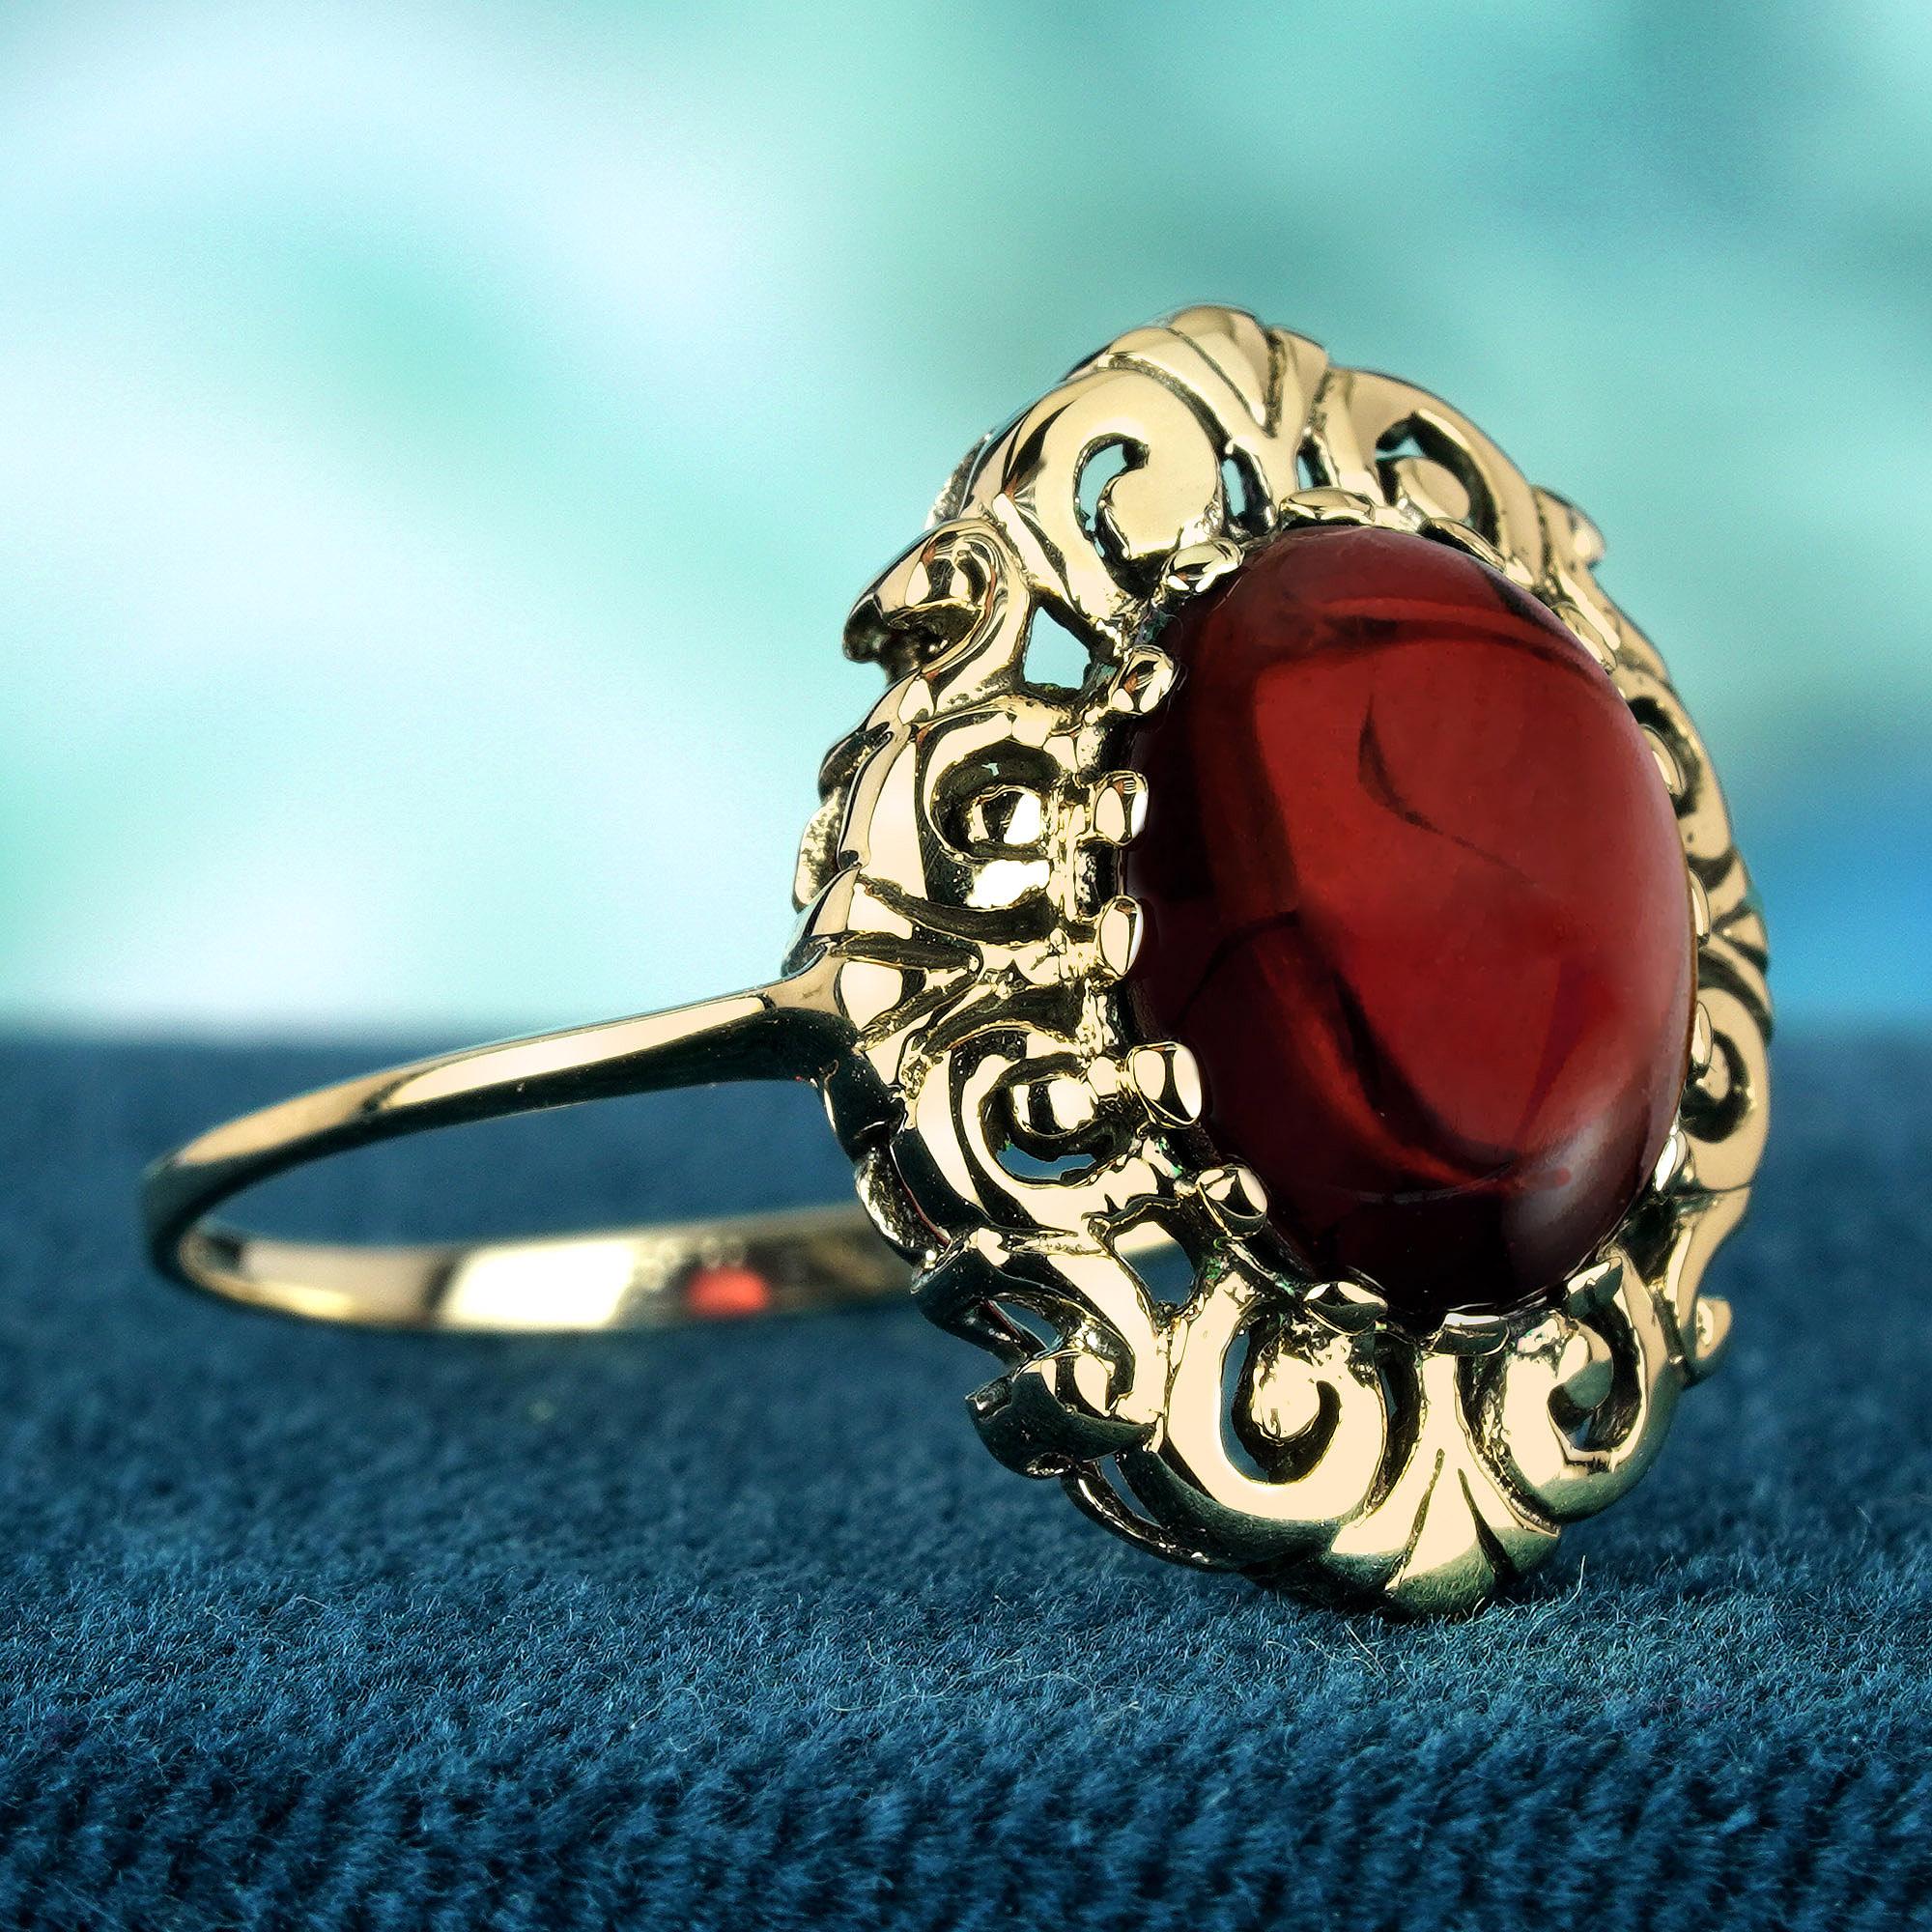 This vintage-inspired ring’s centerpiece is an oval cabochon-cut natural garnet, known for its deep red hue and smooth, domed surface. This cabochon garnet is set amidst a backdrop of yellow gold, which is adorned with intricate vintage-style